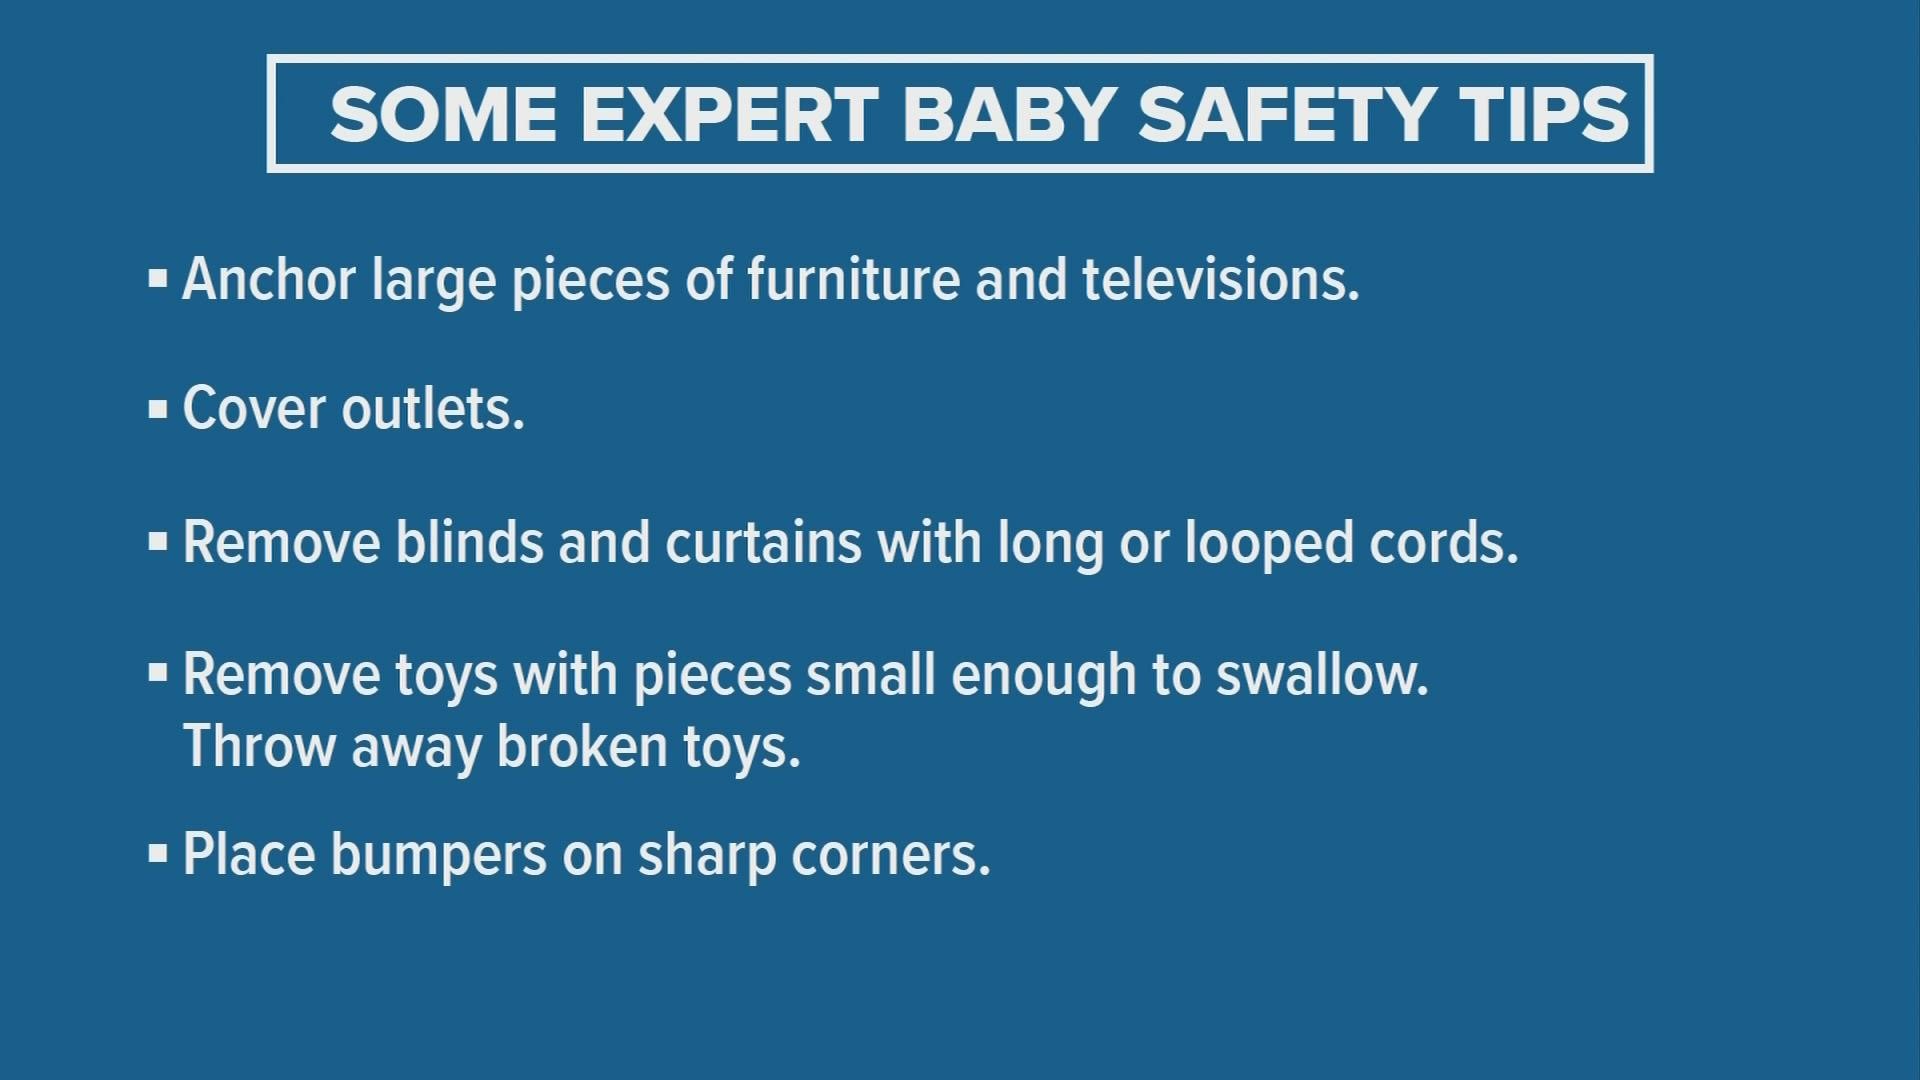 Experts have some tips on safety measures you can take with your kids